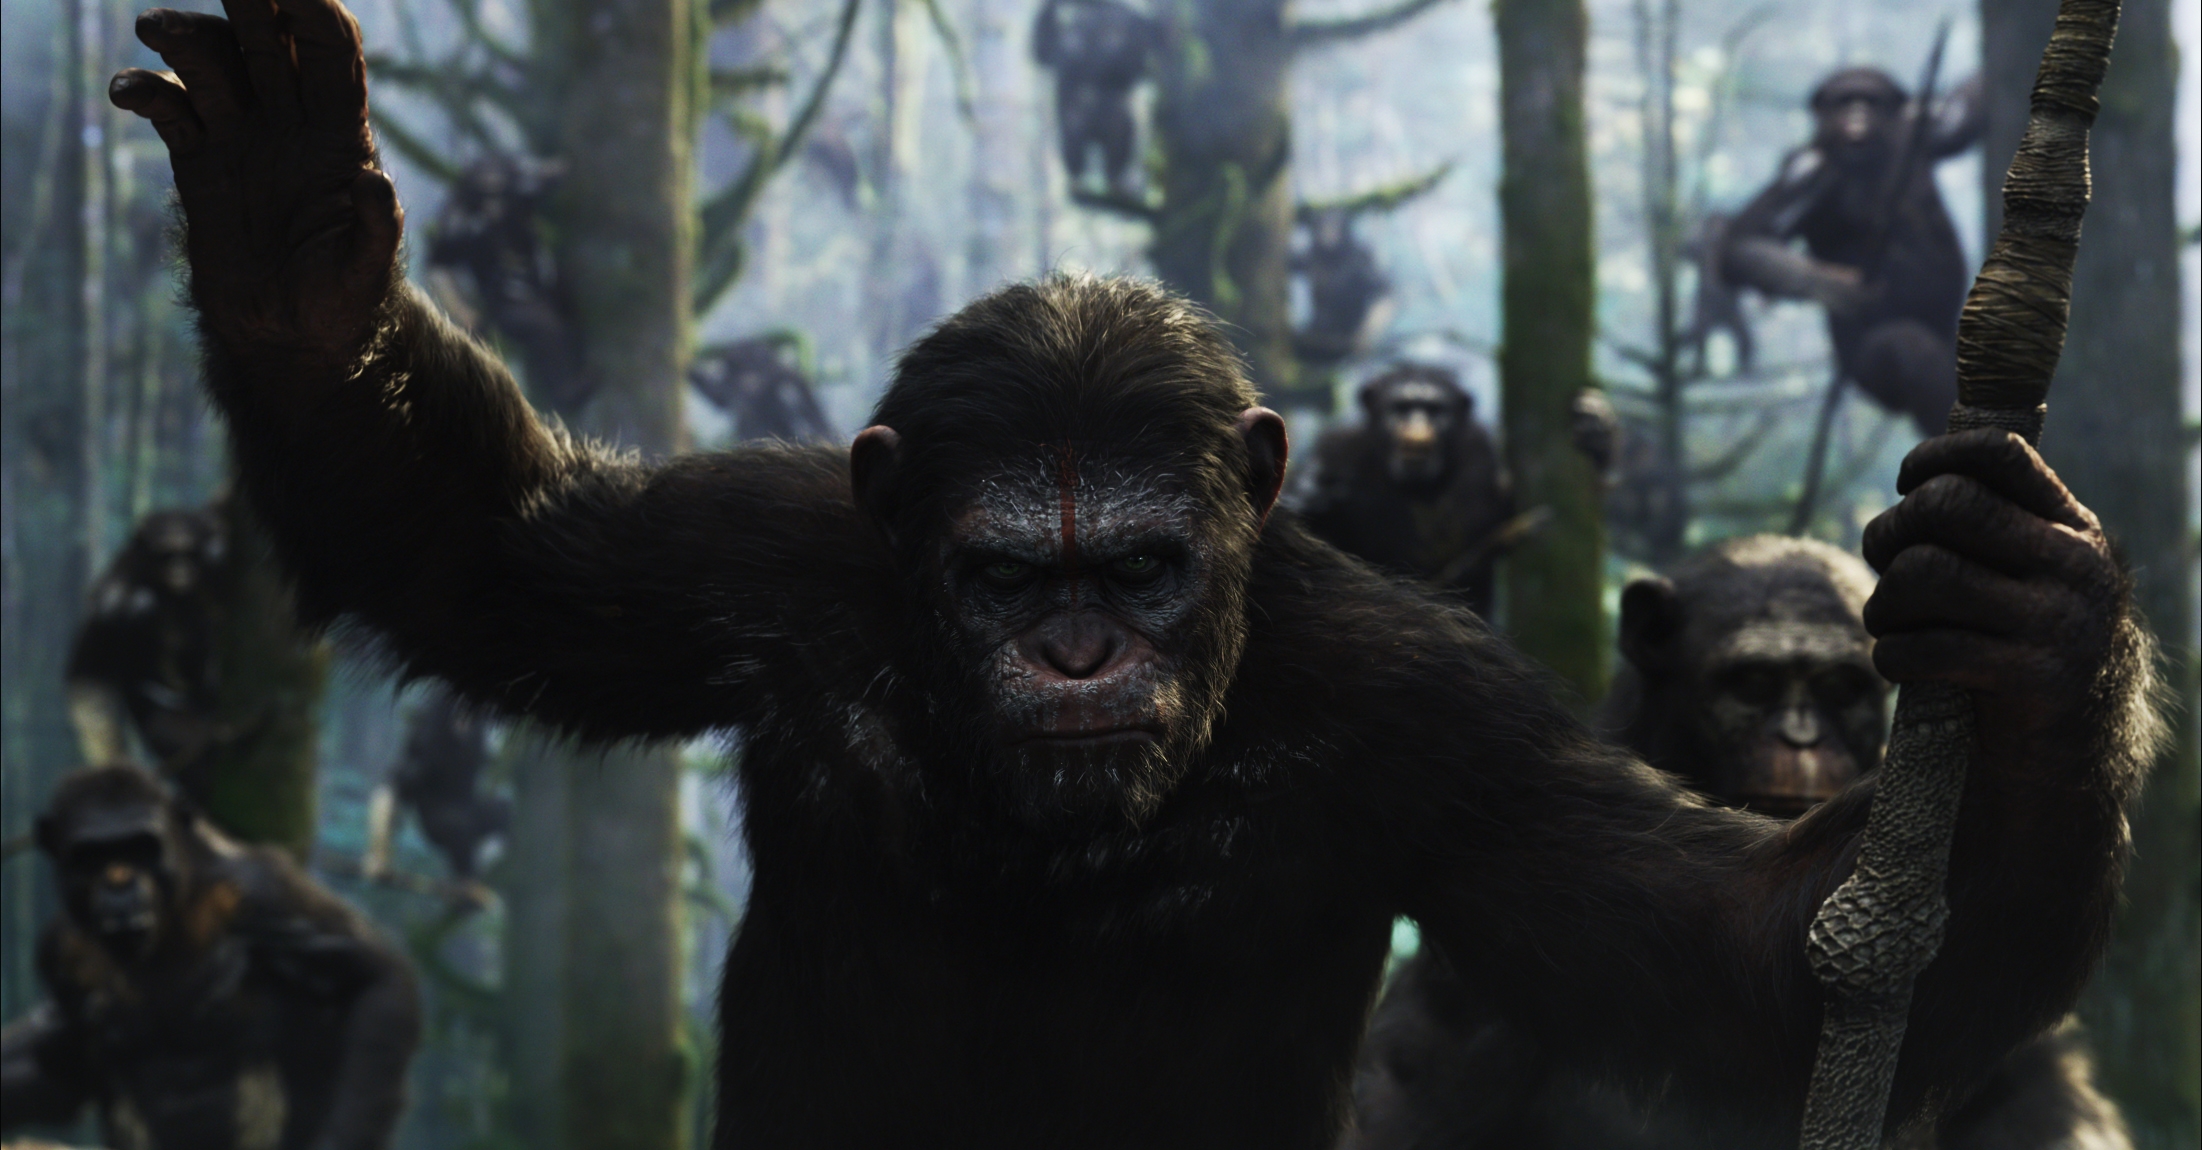 List: Top 3 Scenes in Planet of Apes Franchise